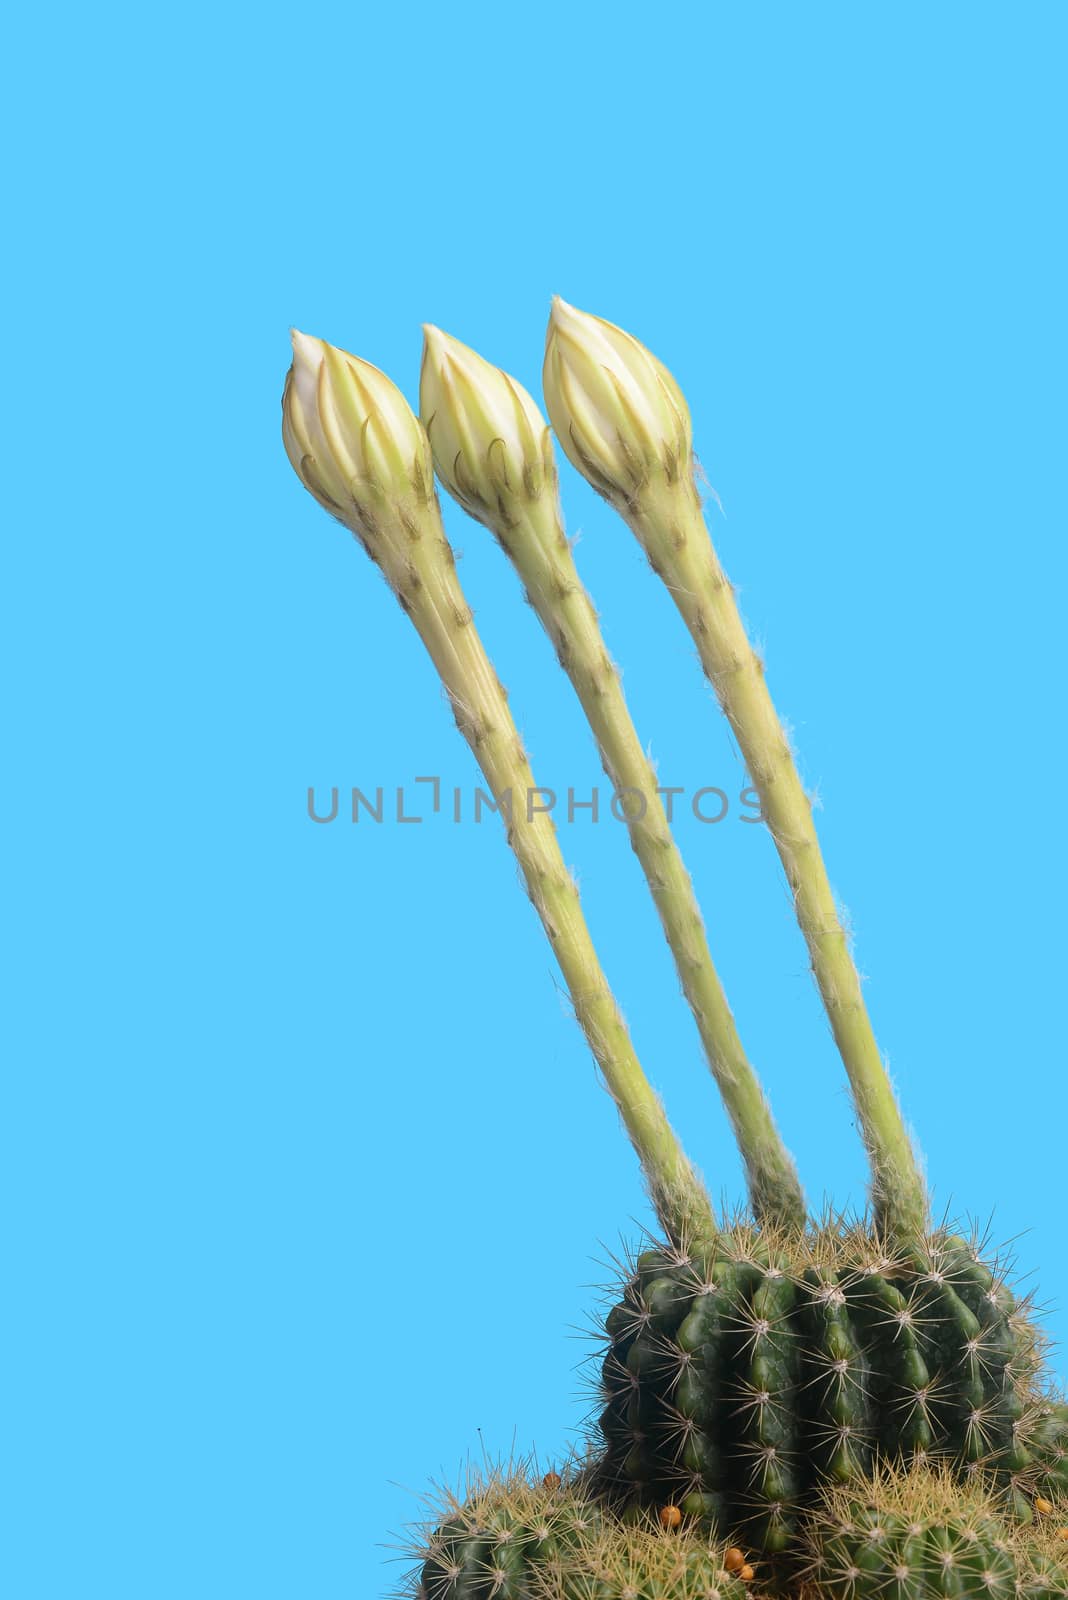 Blooming White Echinopsis calochlora cactus flower on blue background by ideation90